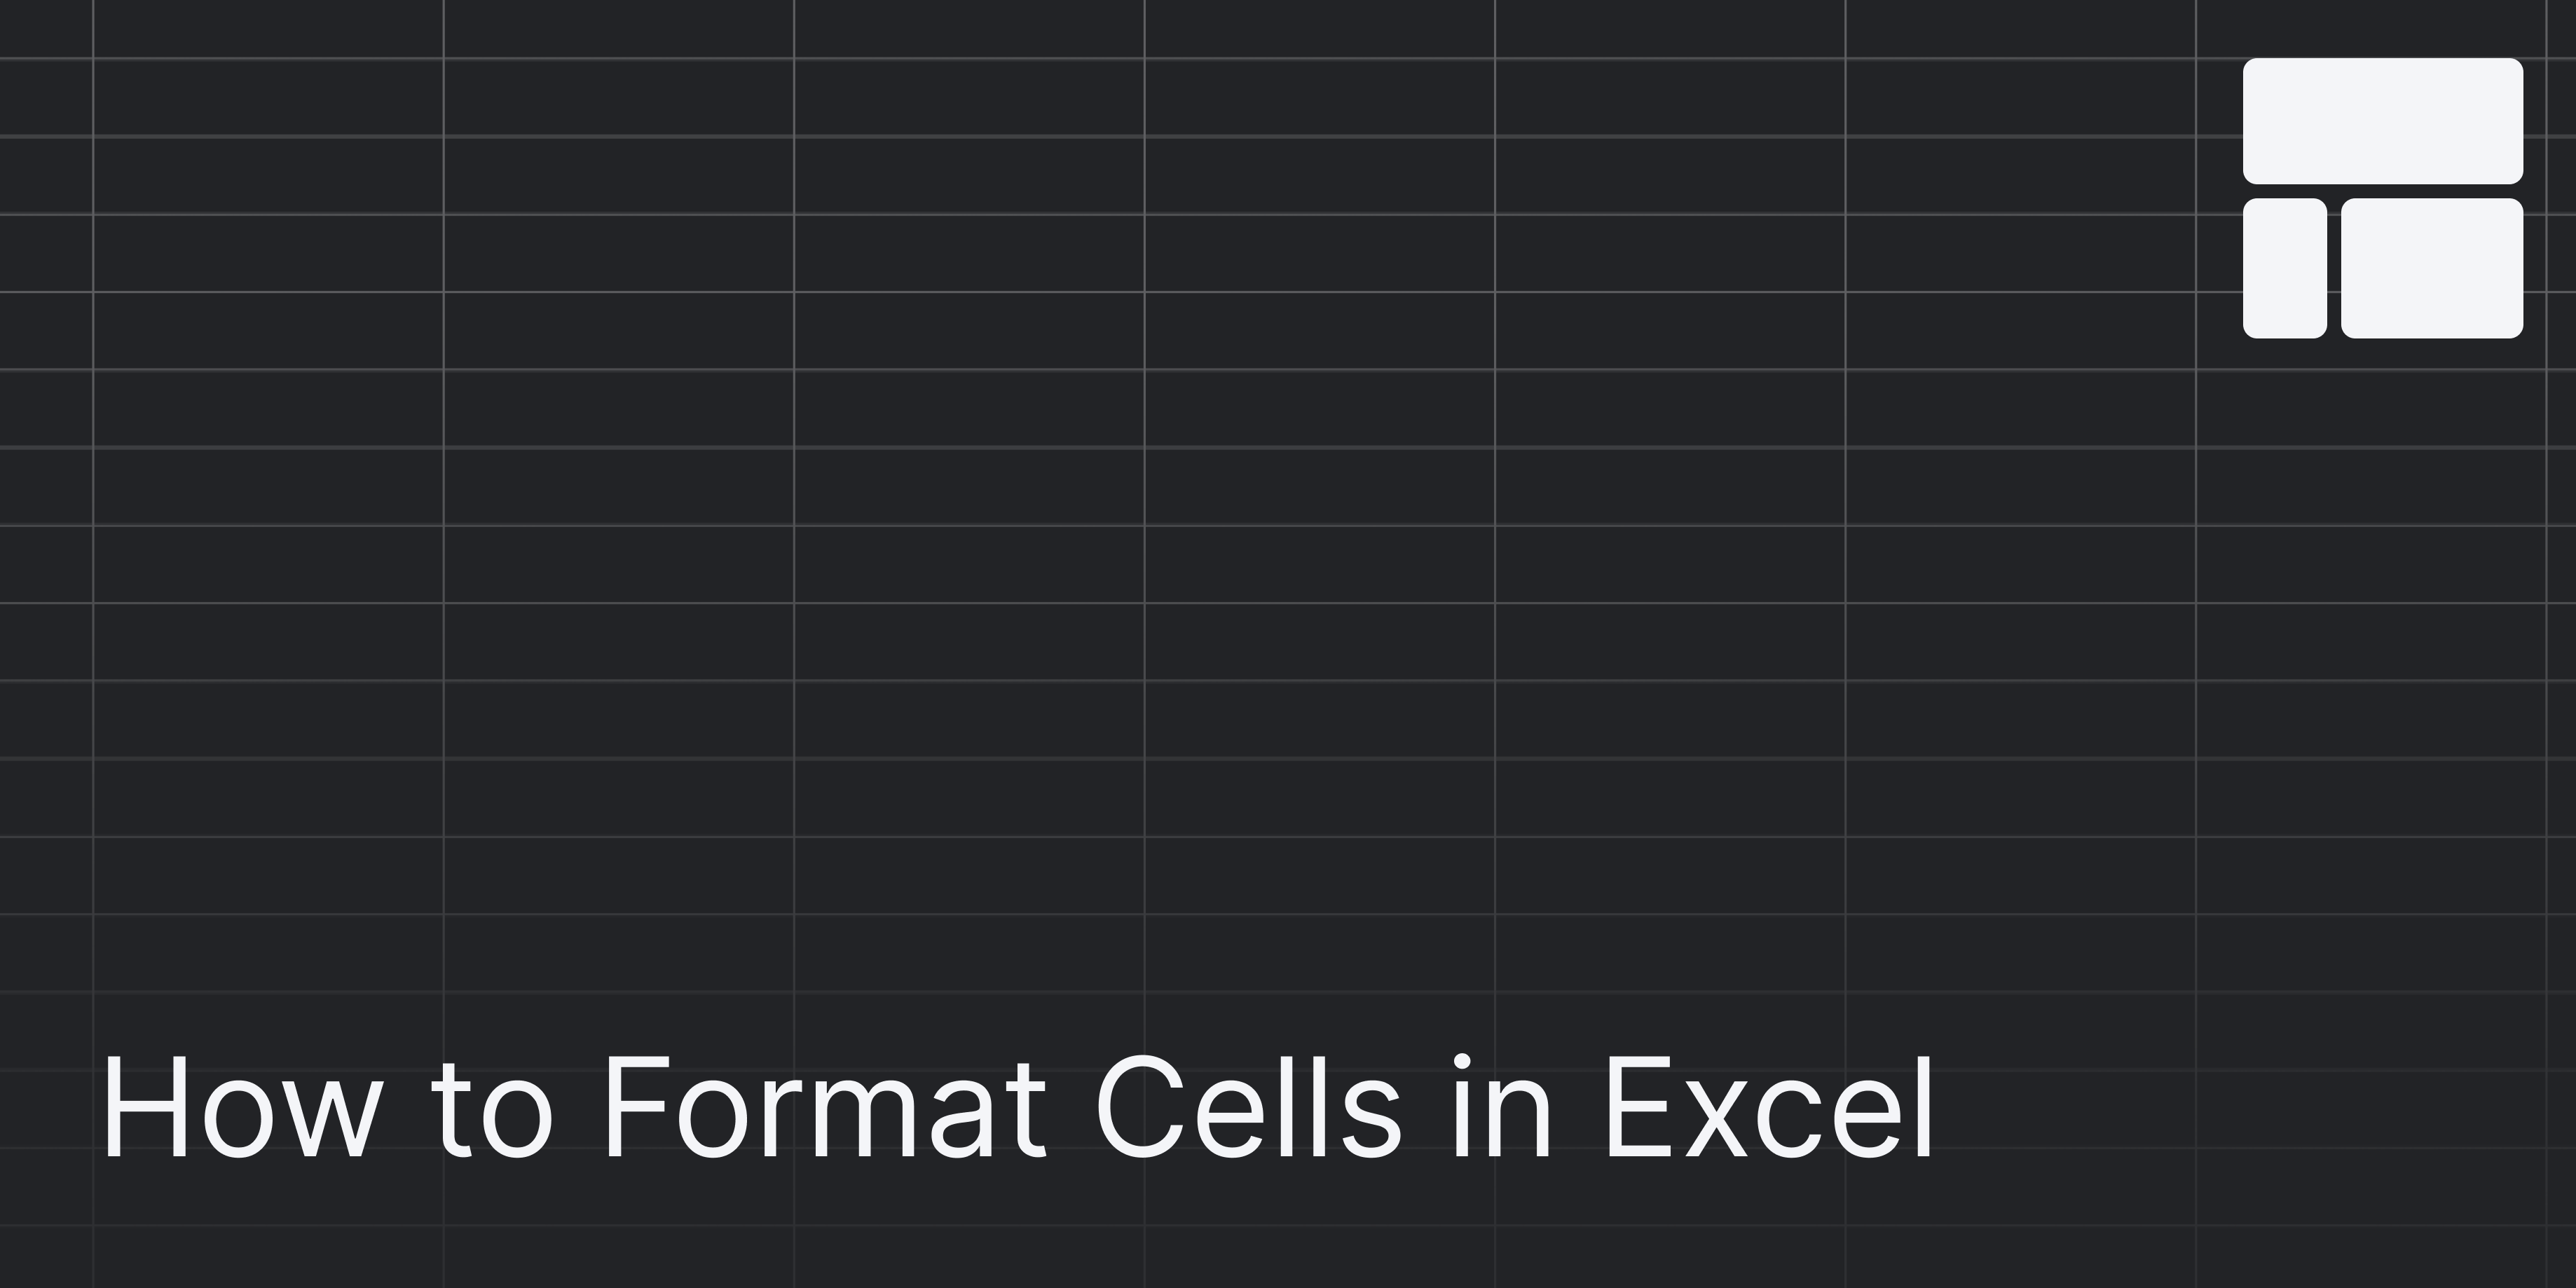 Cover Image for How to Format Cells in Excel (if only Mac had this feature...)